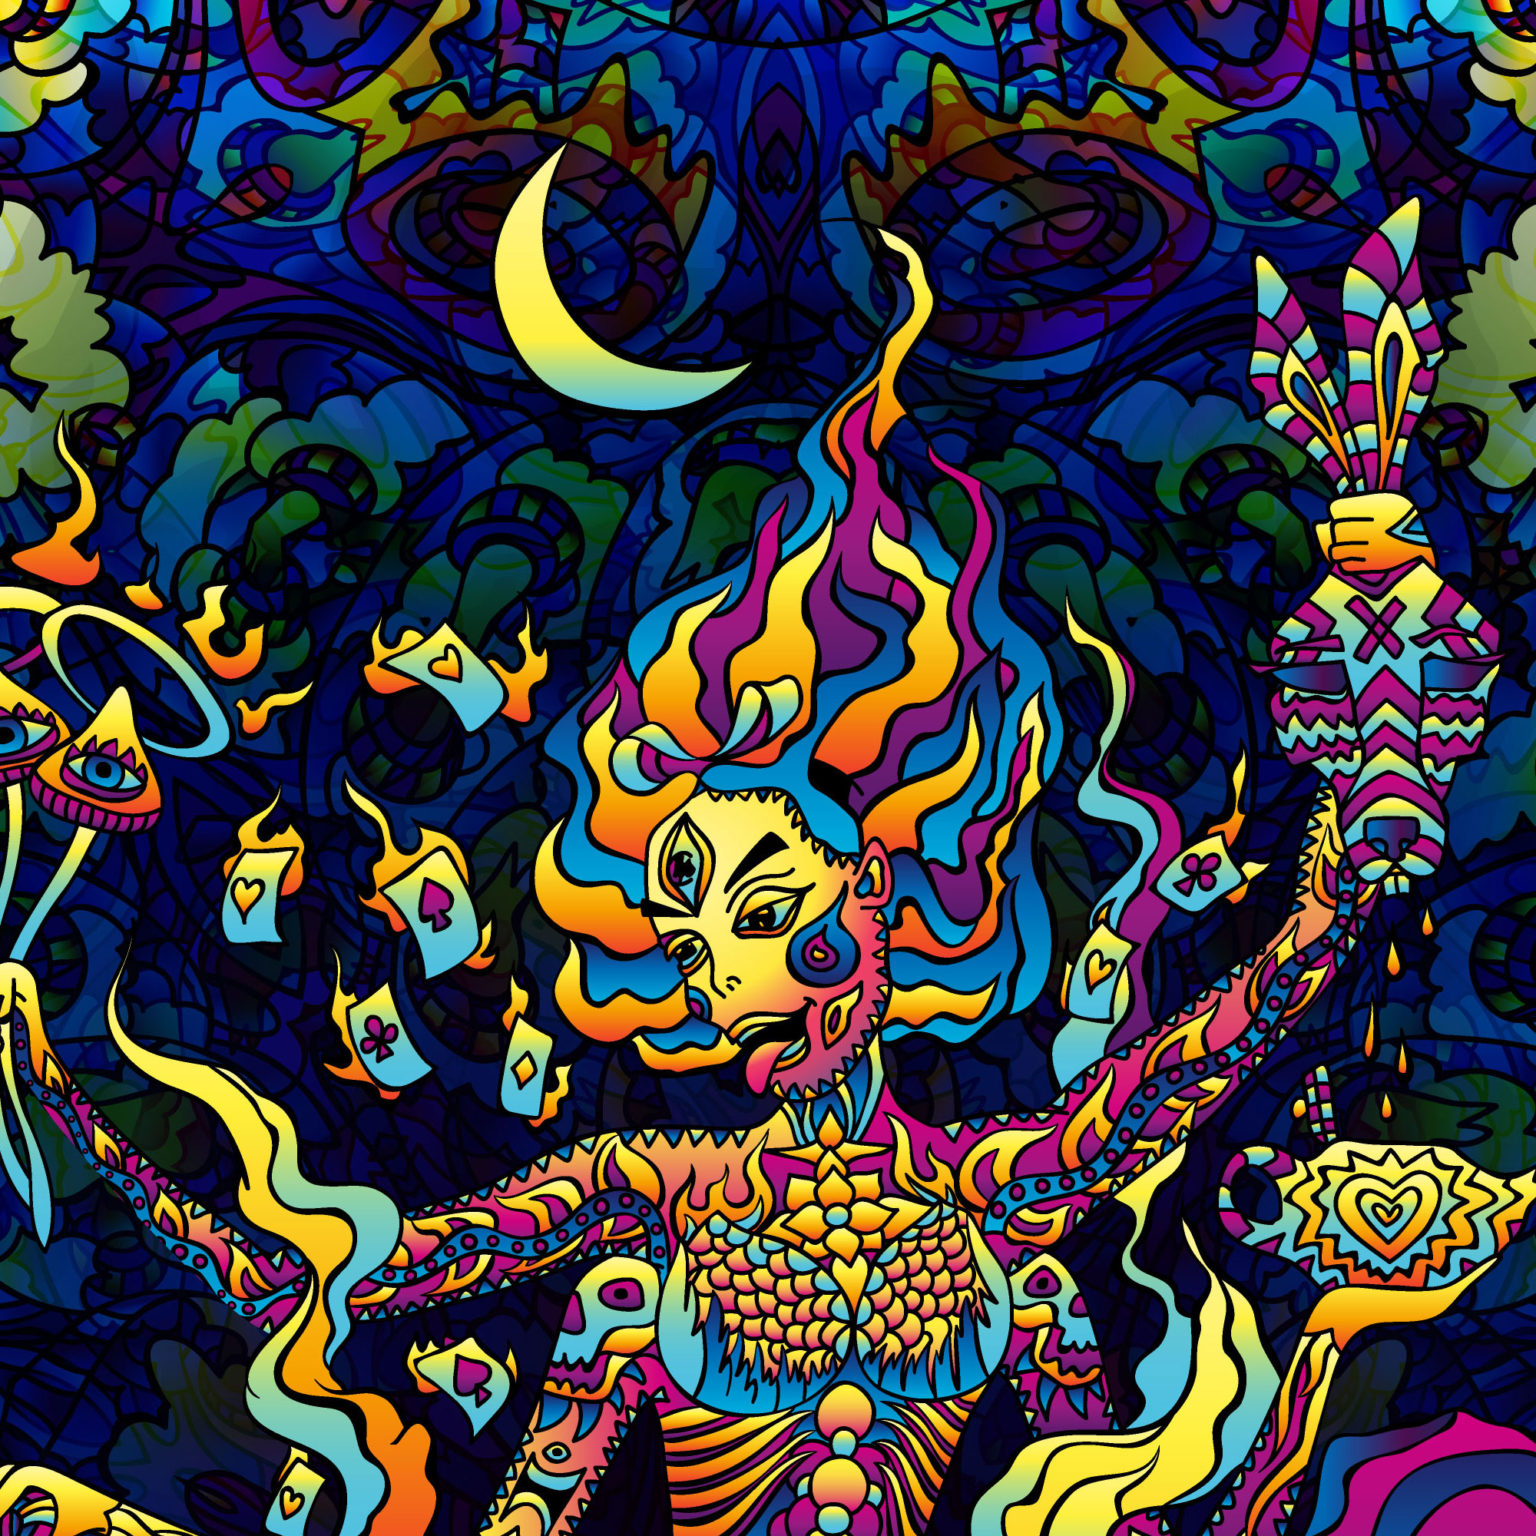 Kali in Acidland - Trippy Tapestry UV-Reactive Psychedelic Backdrop Wall Hanging - Closeup